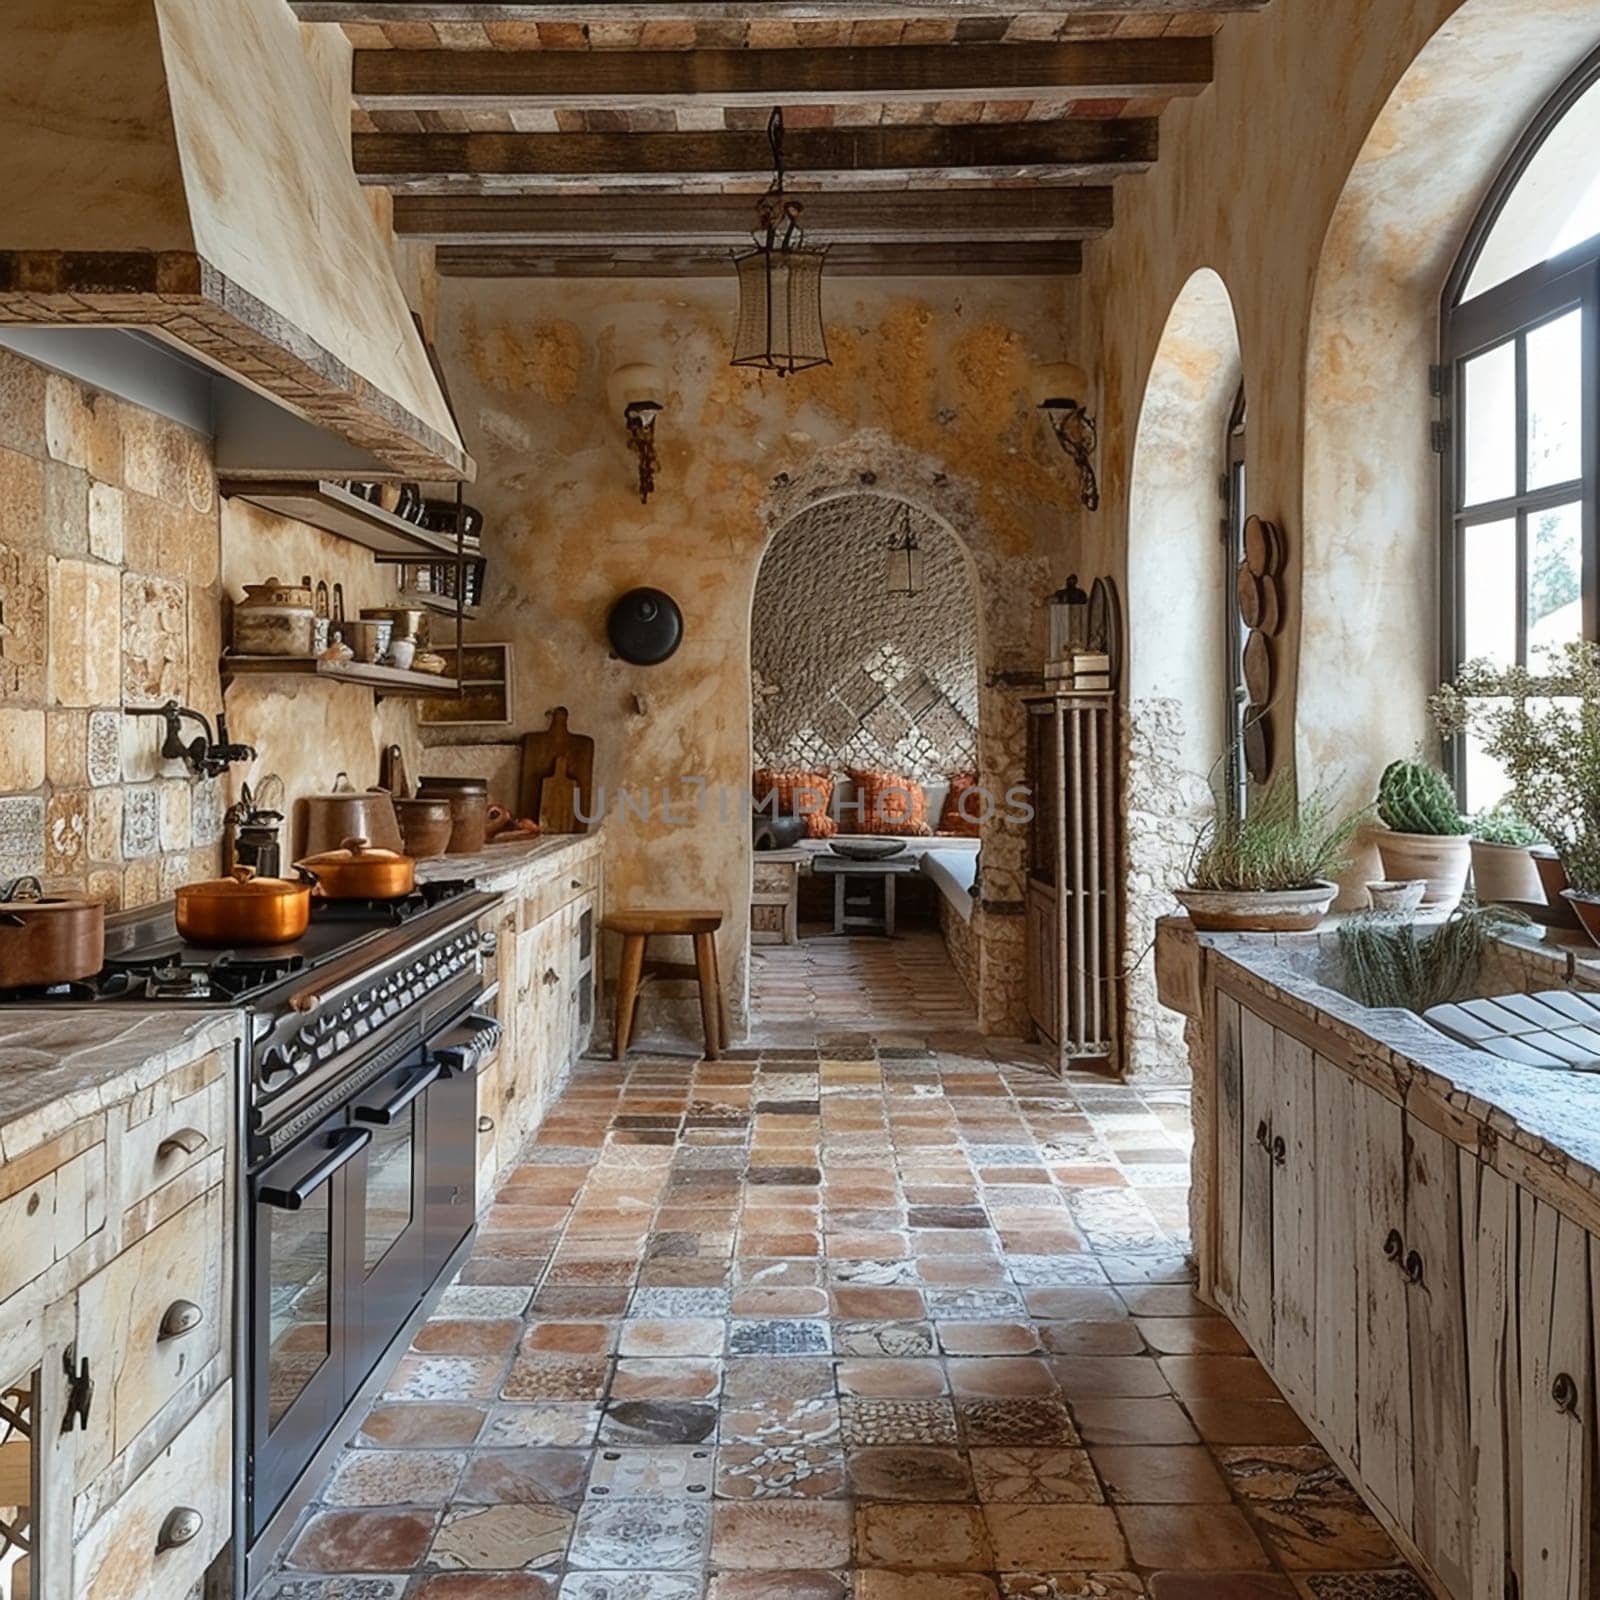 Mediterranean-style kitchen with terracotta tiles and iron accents